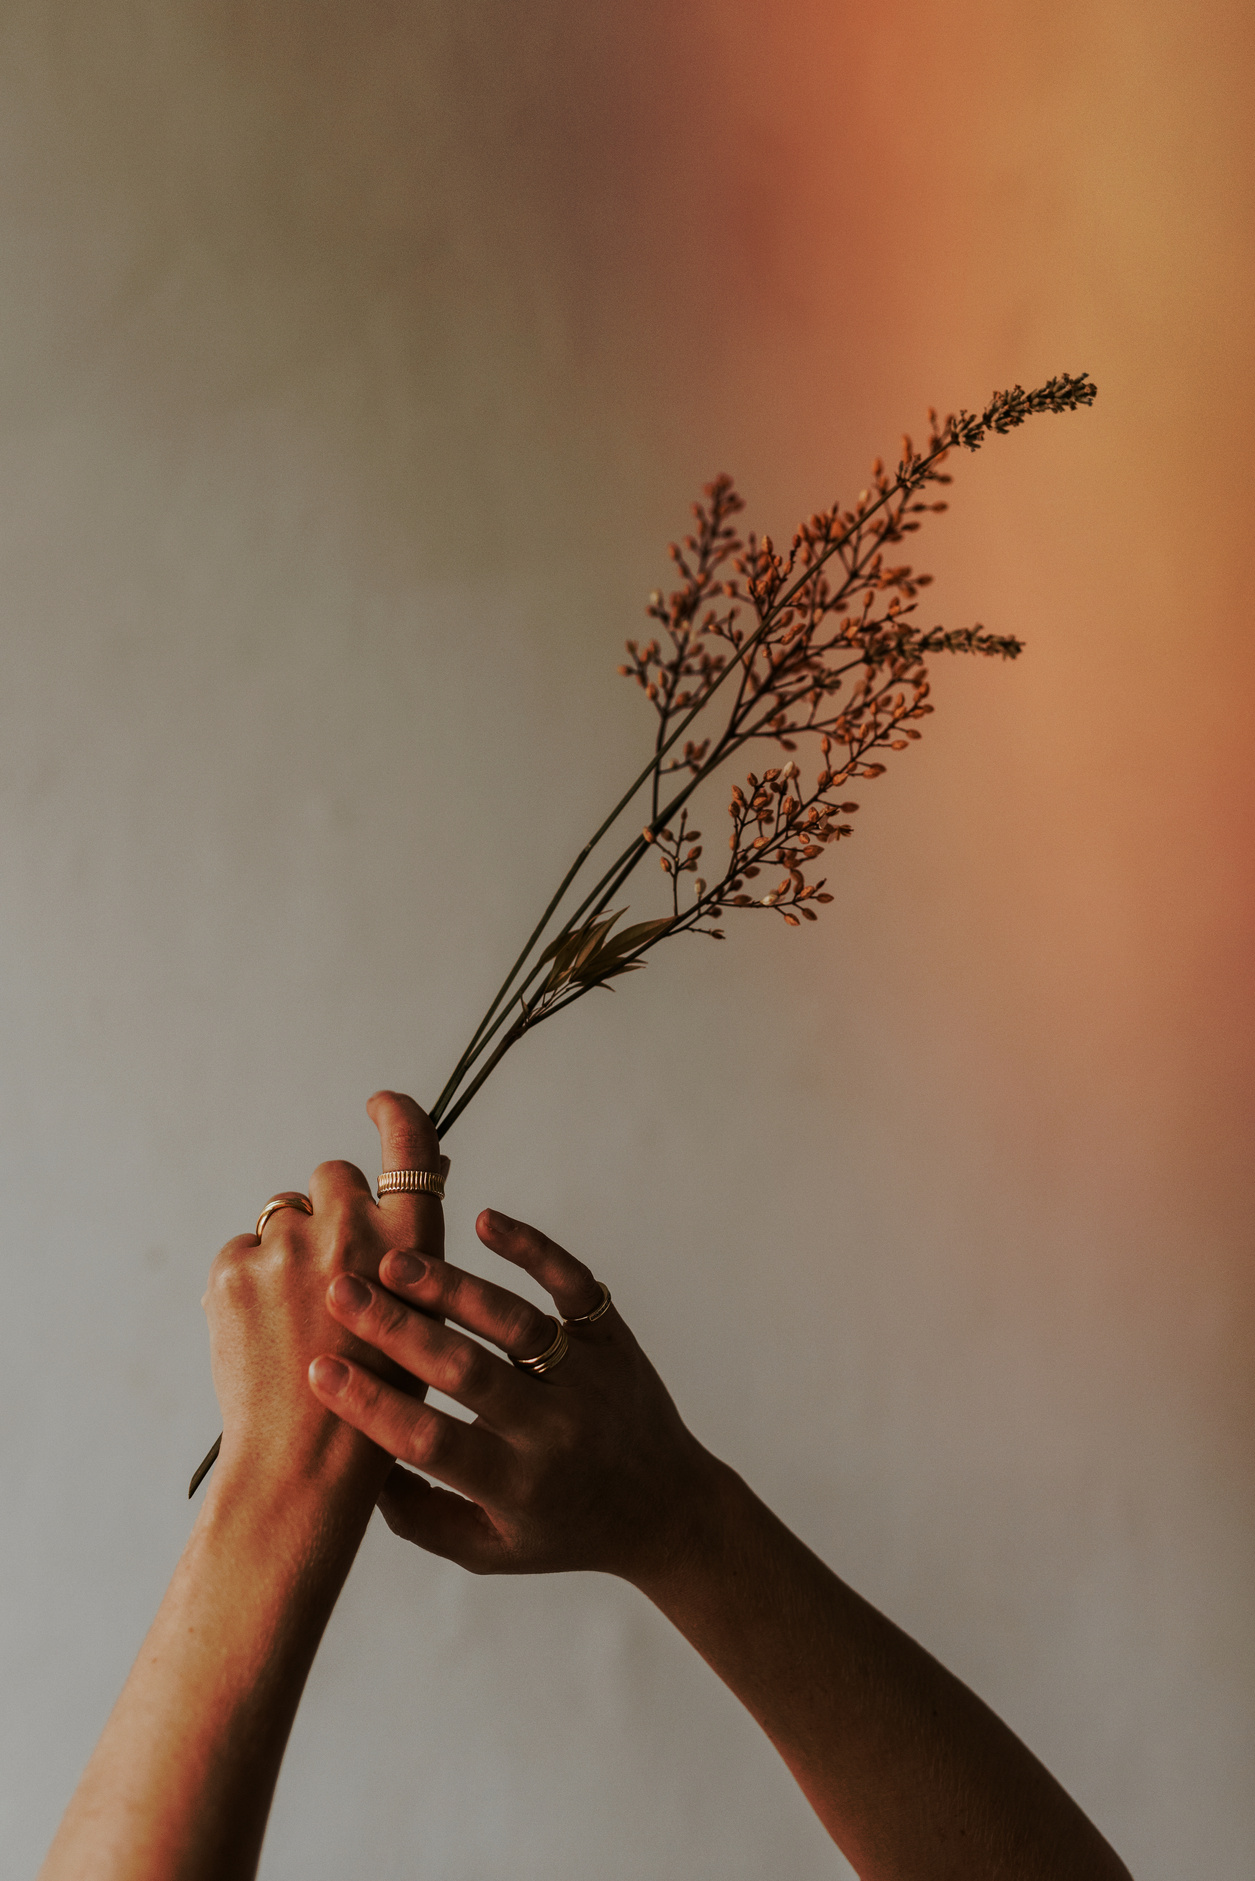 Aesthetic hands with flowers, beige background